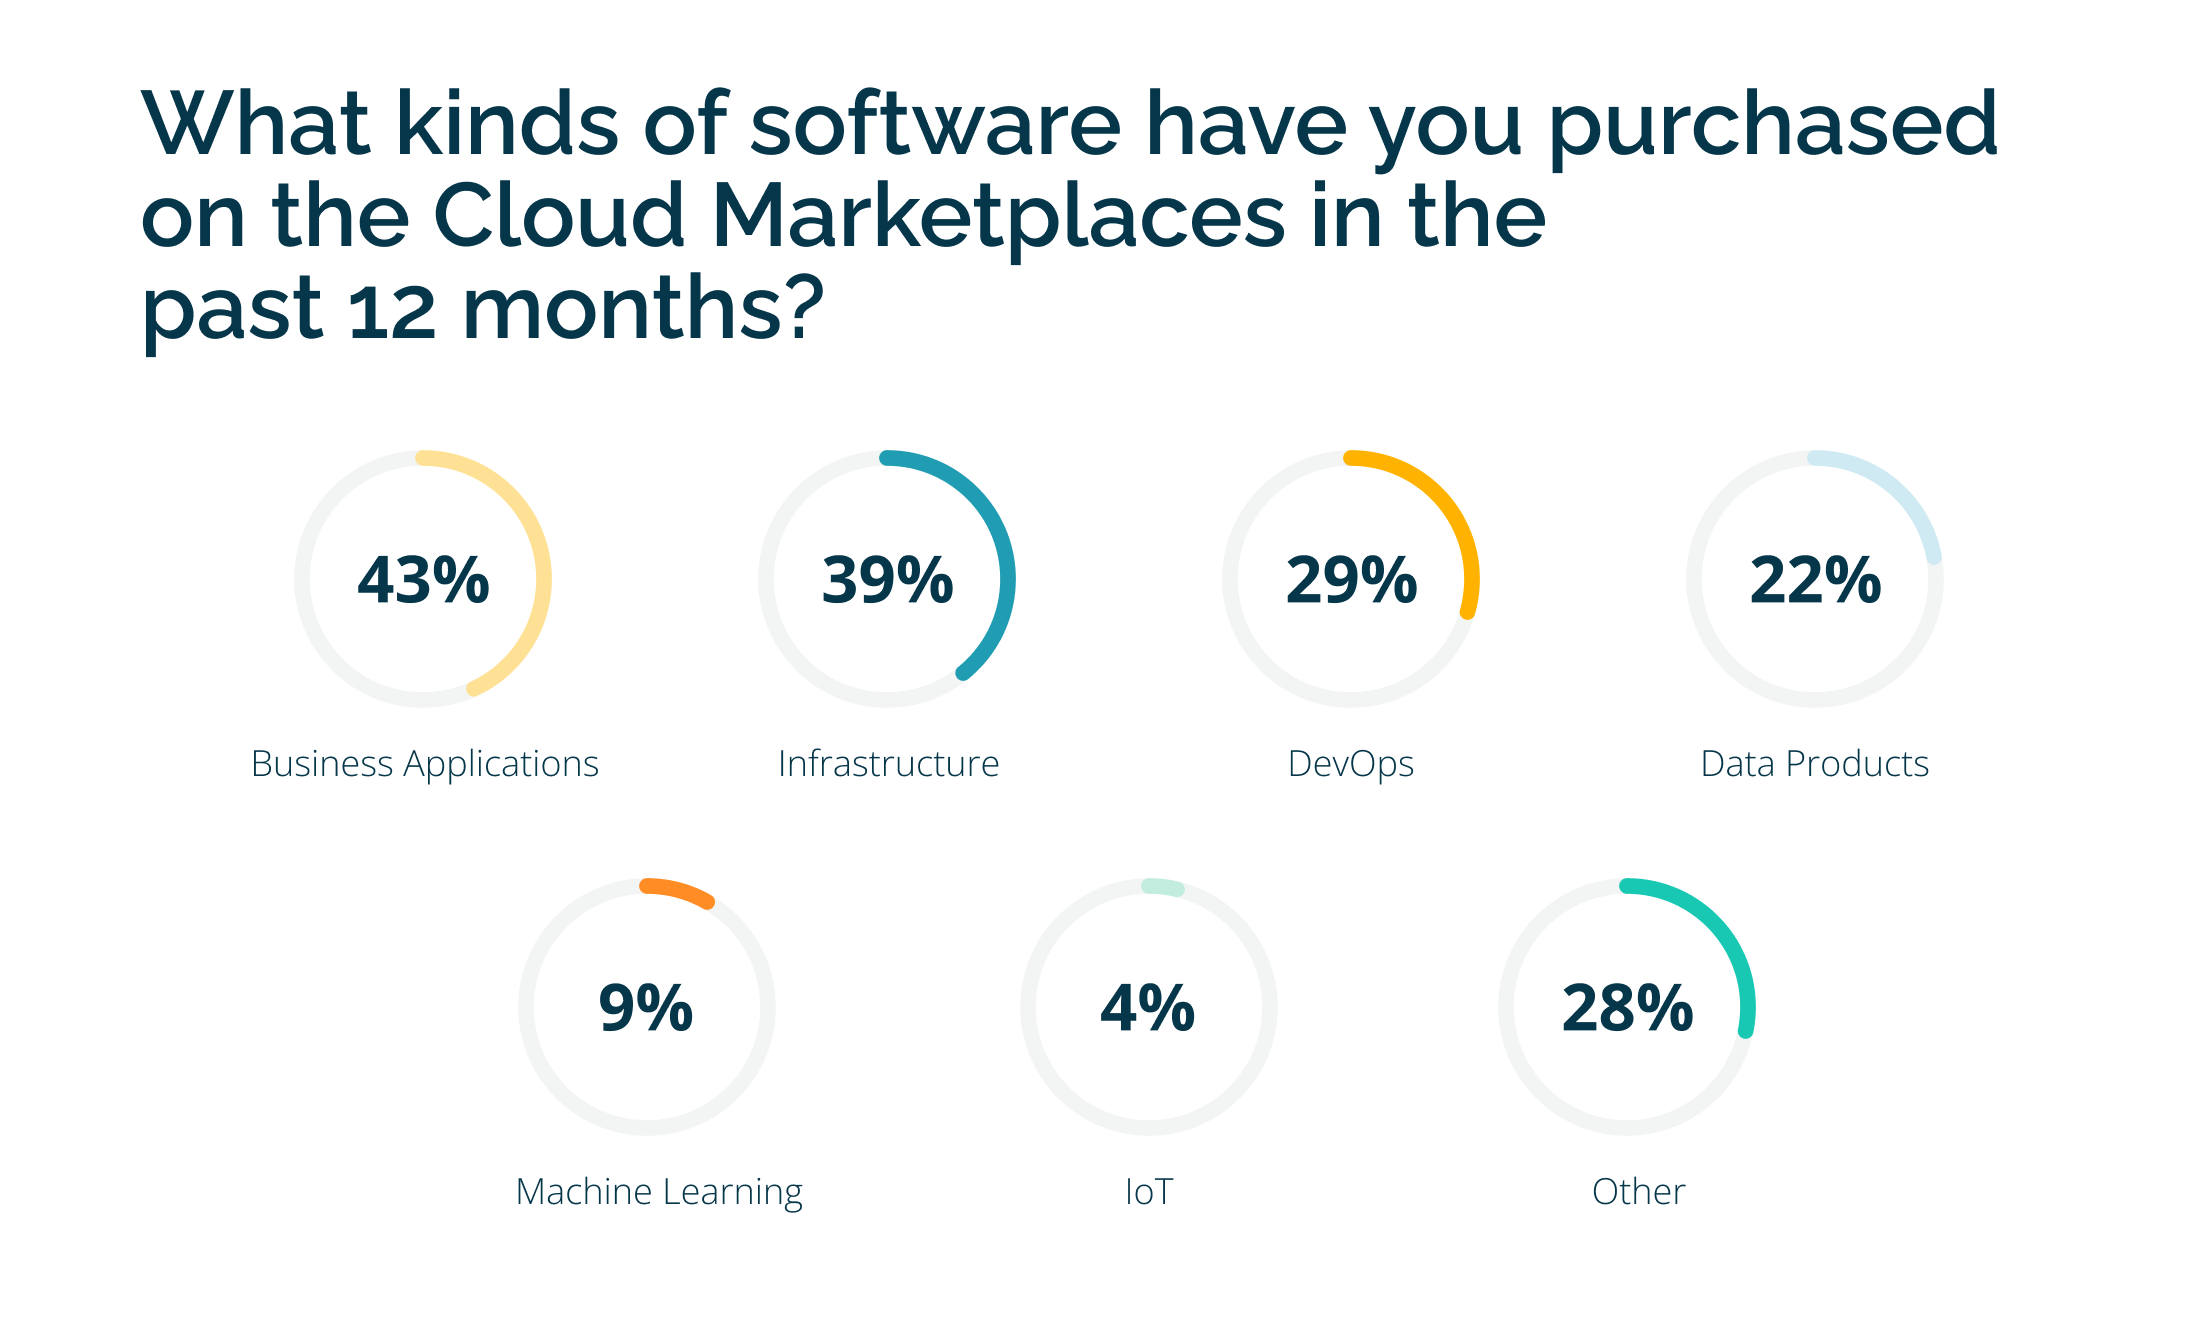 What kinds of software have you purchased on the cloud marketplaces in the last 12 months